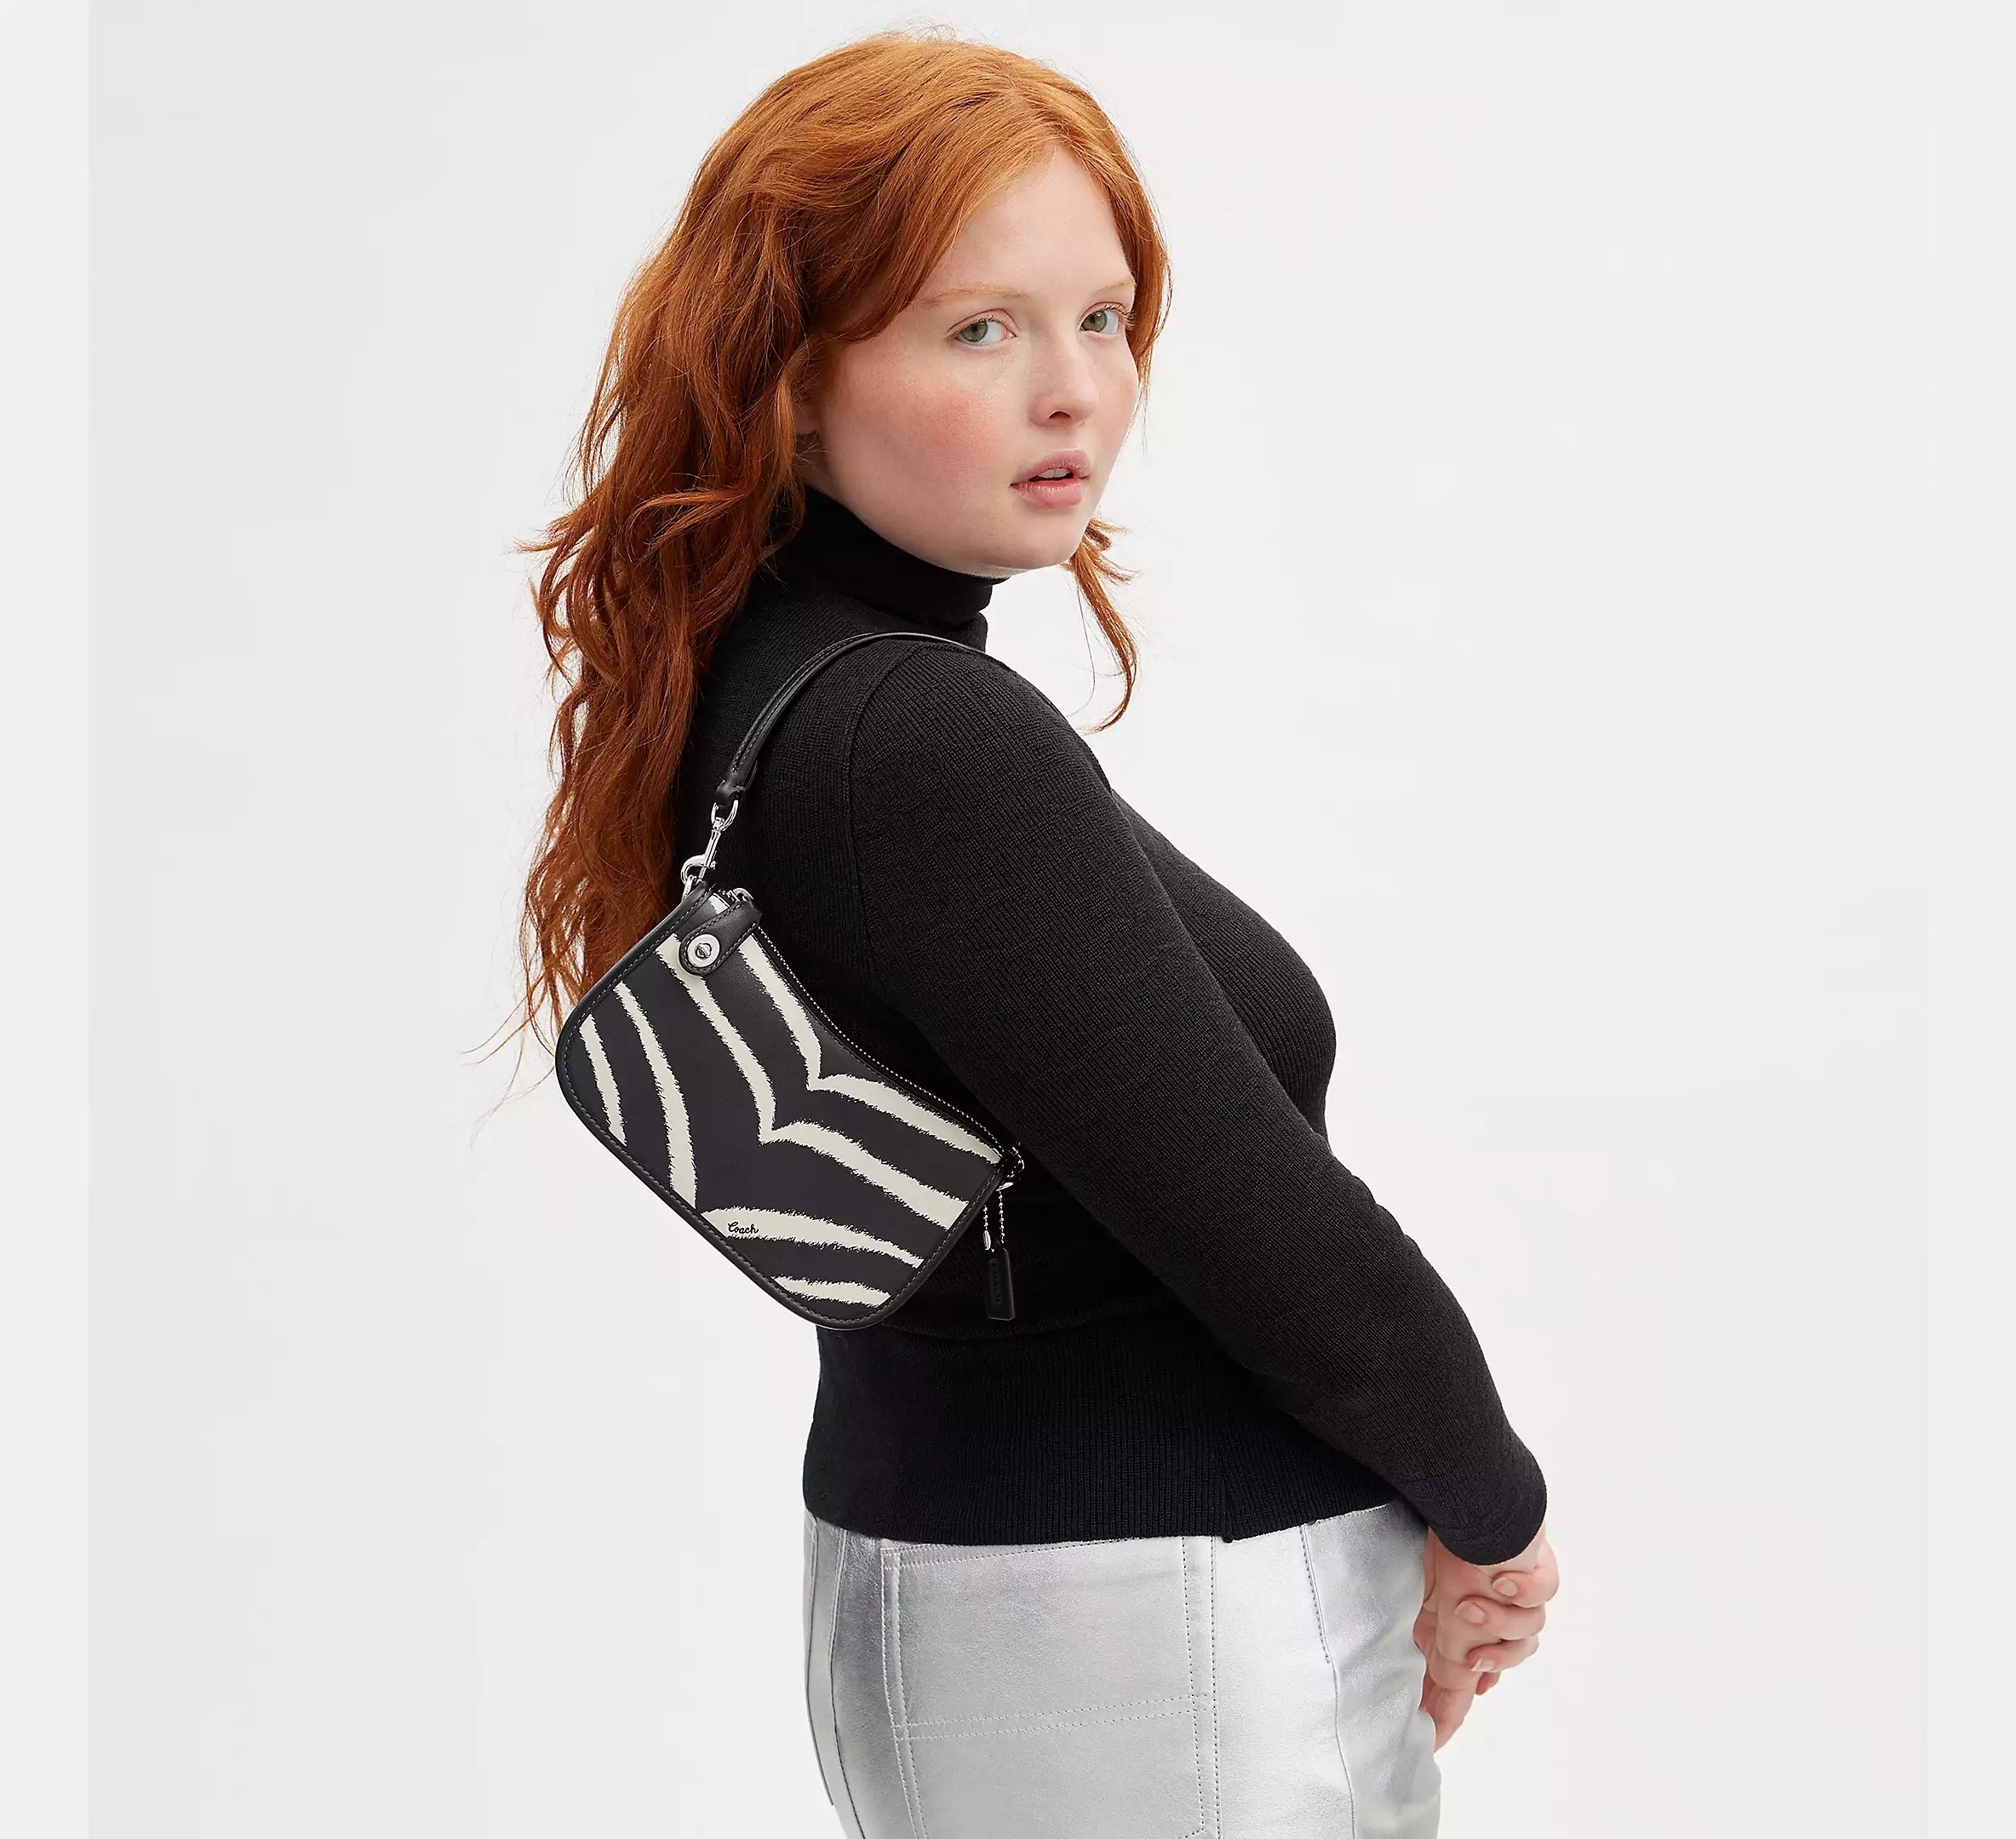 model wearing the black and white striped version